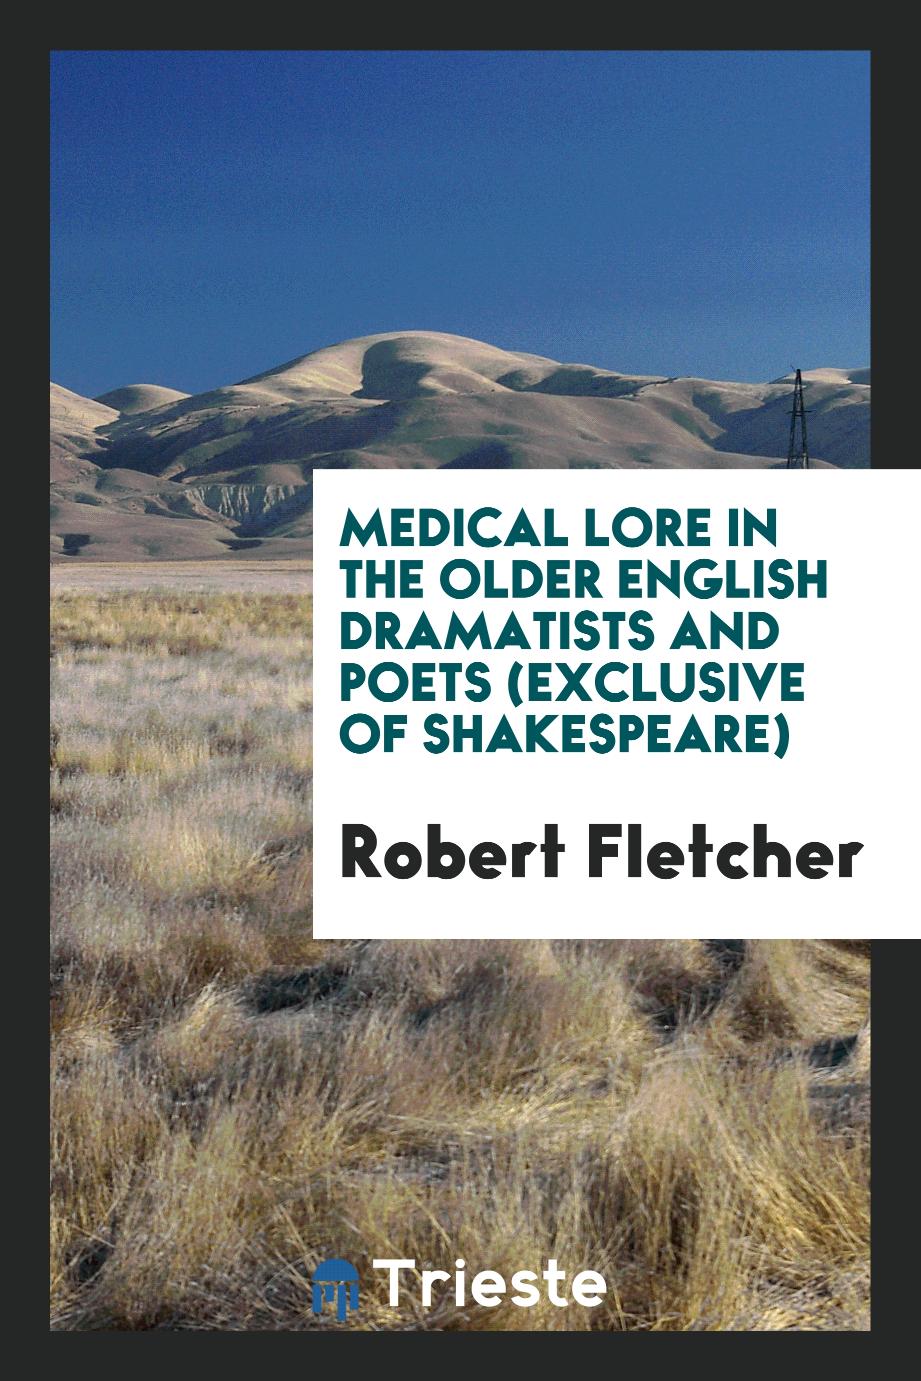 Medical Lore in the Older English Dramatists and Poets (exclusive of Shakespeare)